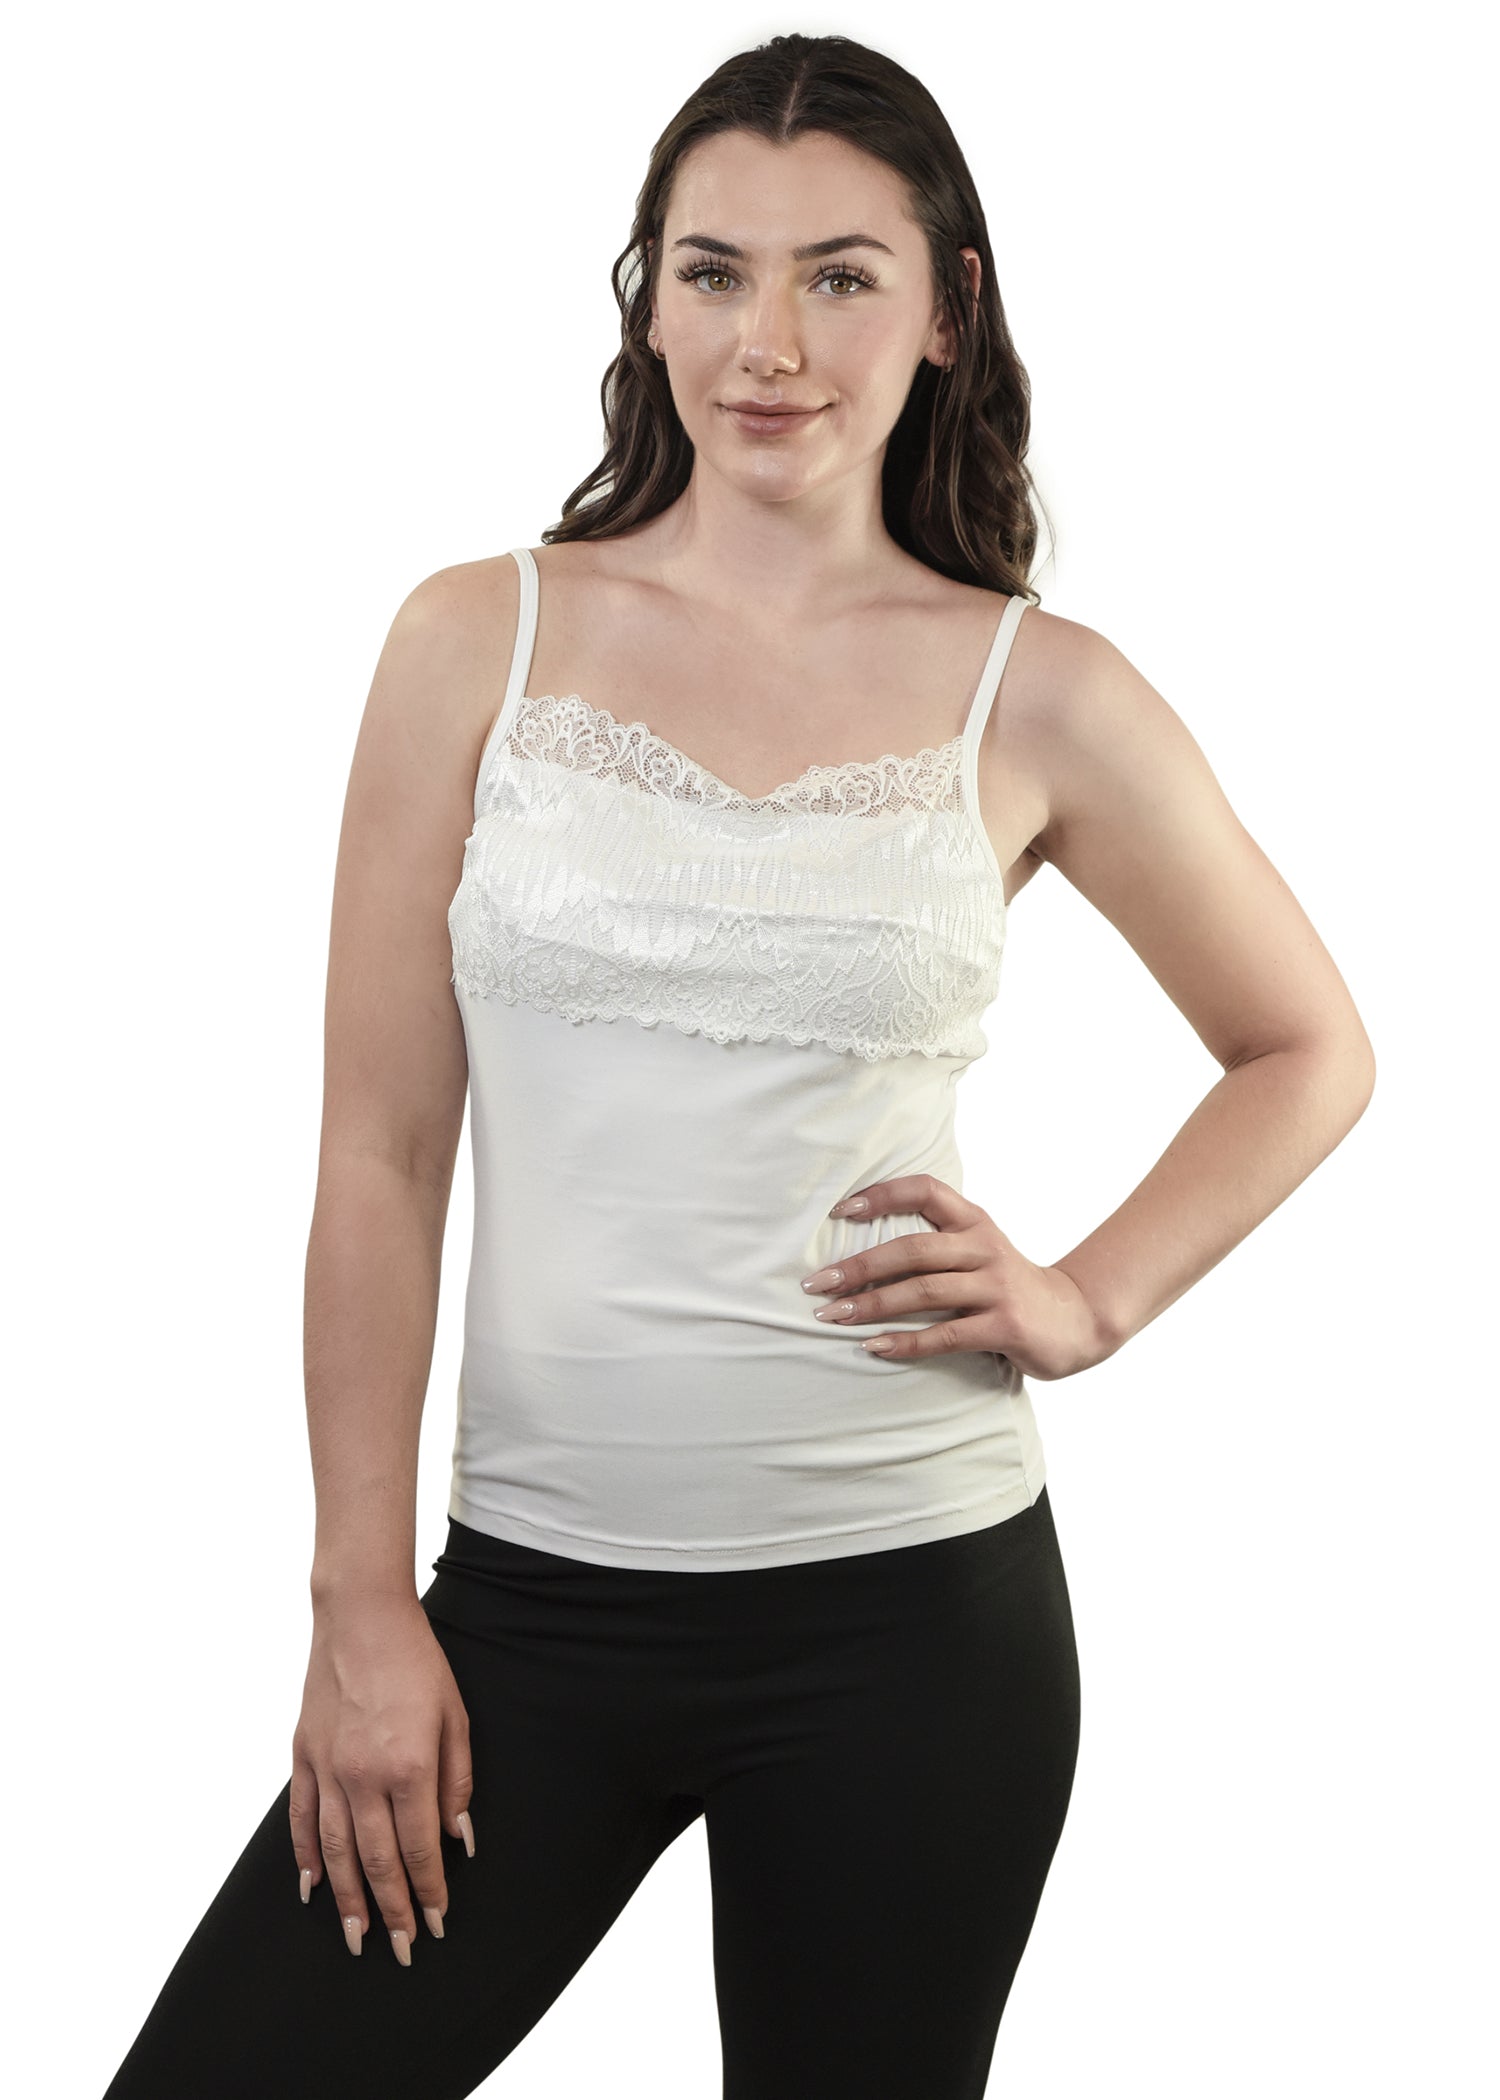 Model Wearing Young USA Ladies Camisole front view - White